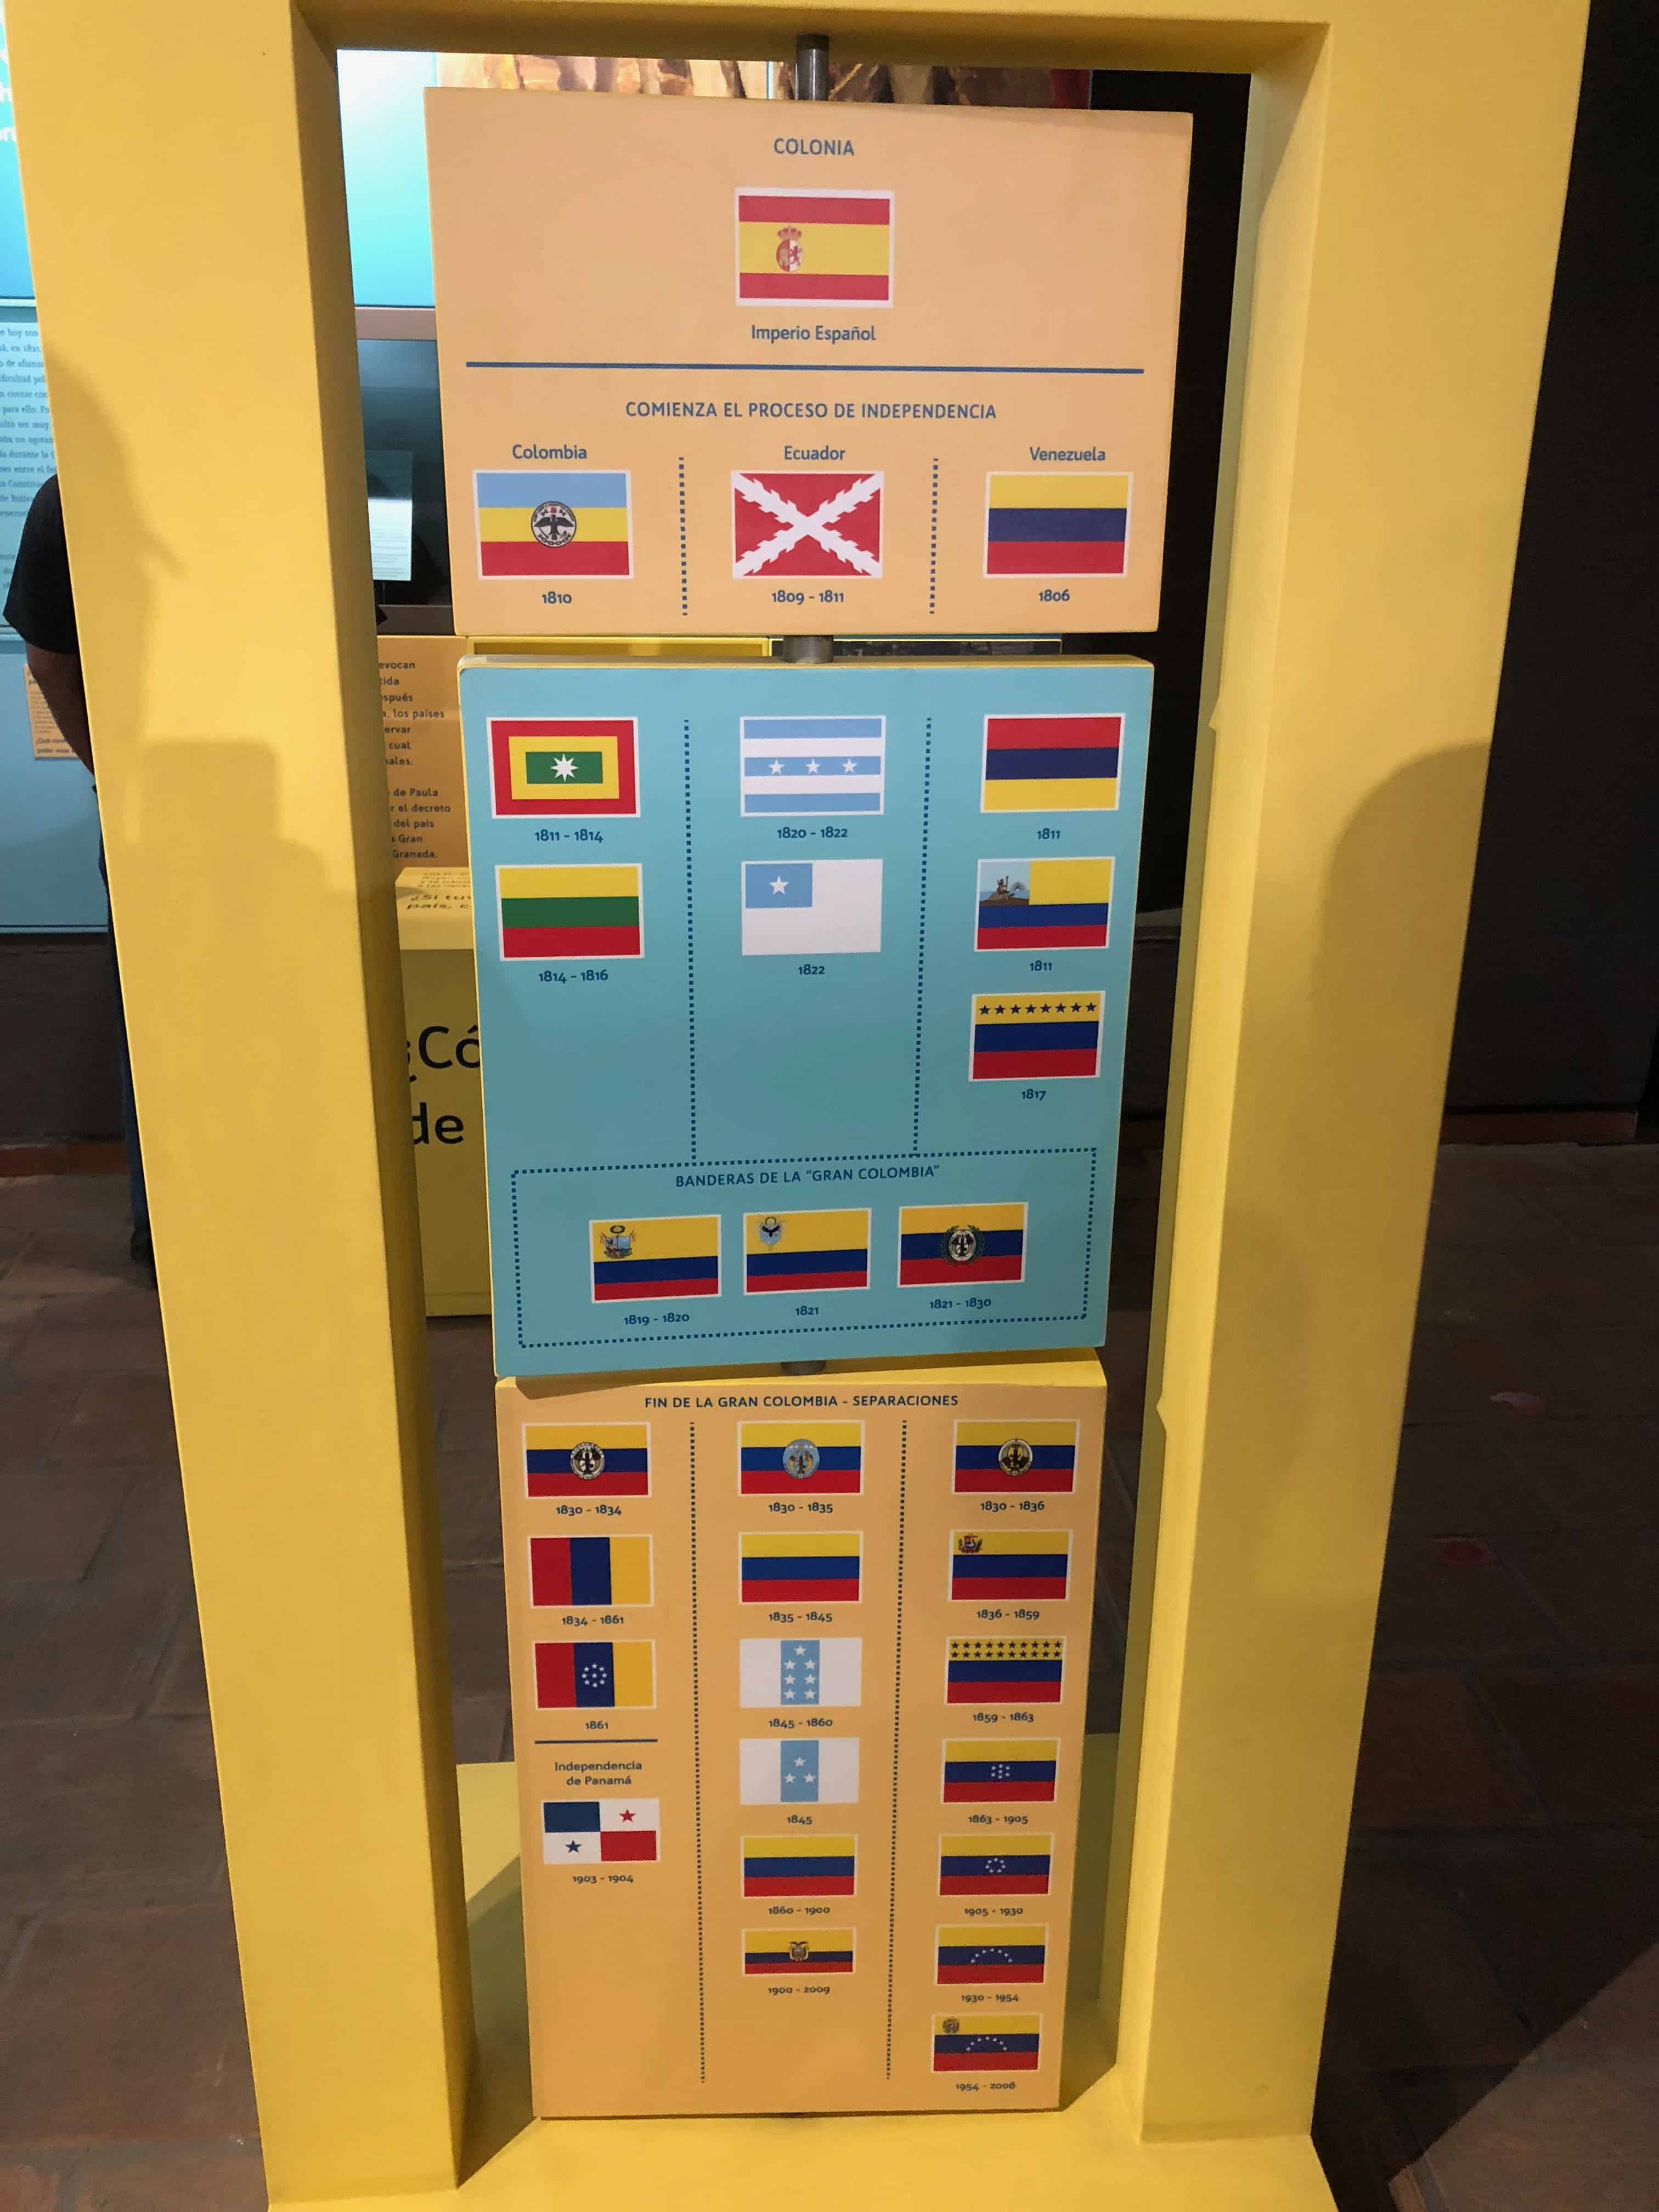 Evolution of the flags of Colombia, Ecuador, and Venezuela at Birth House of General Santander